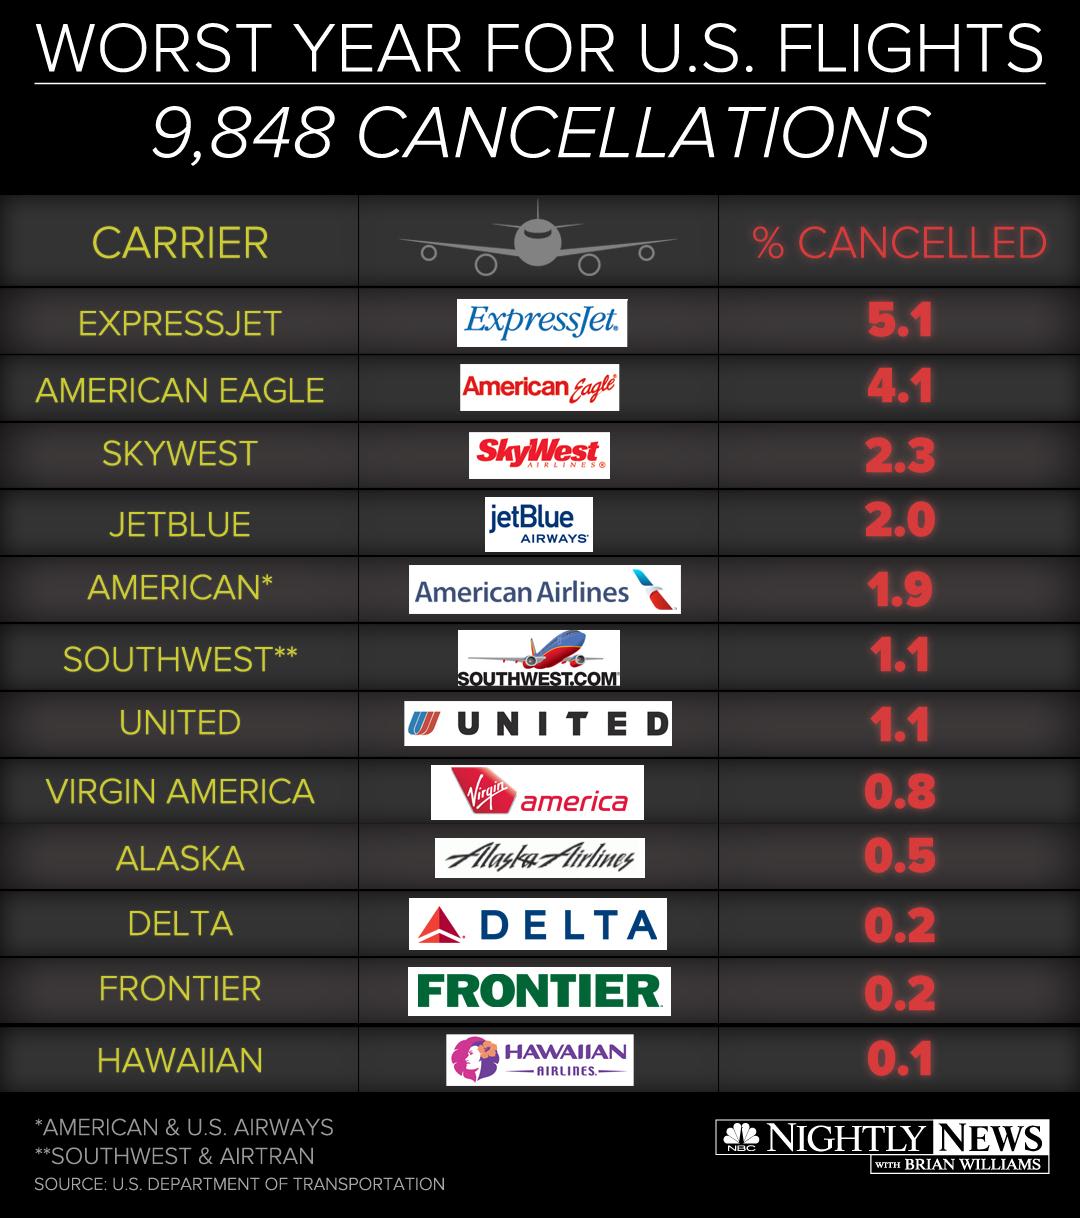 Delayed: More U.S. Airlines